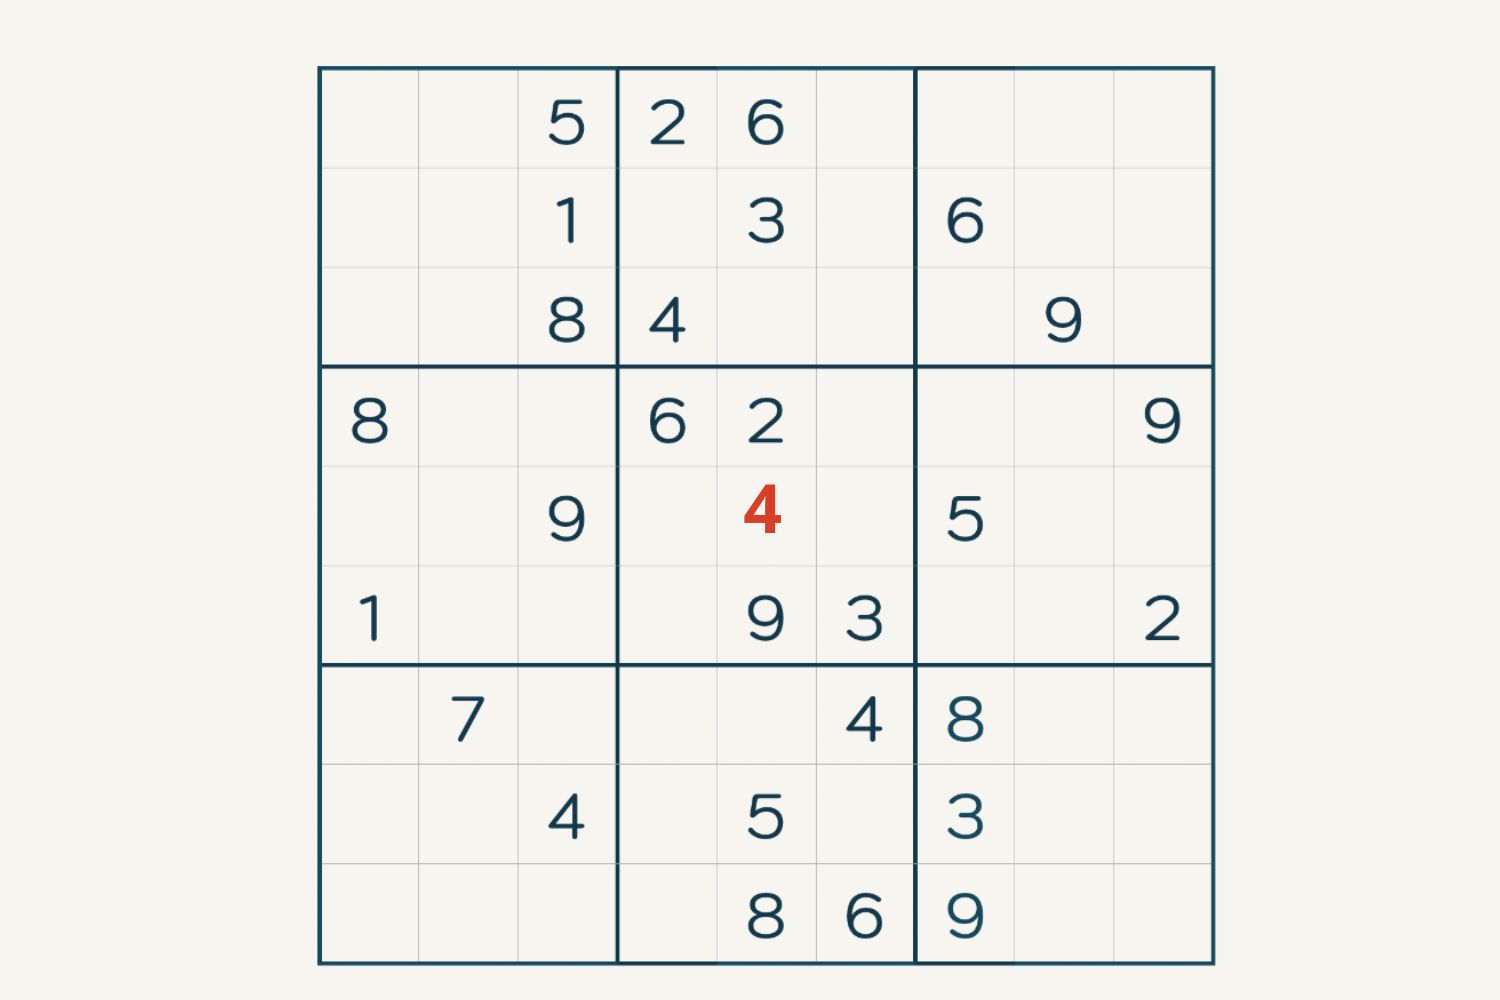 Finding Single Candidates in Sudoku